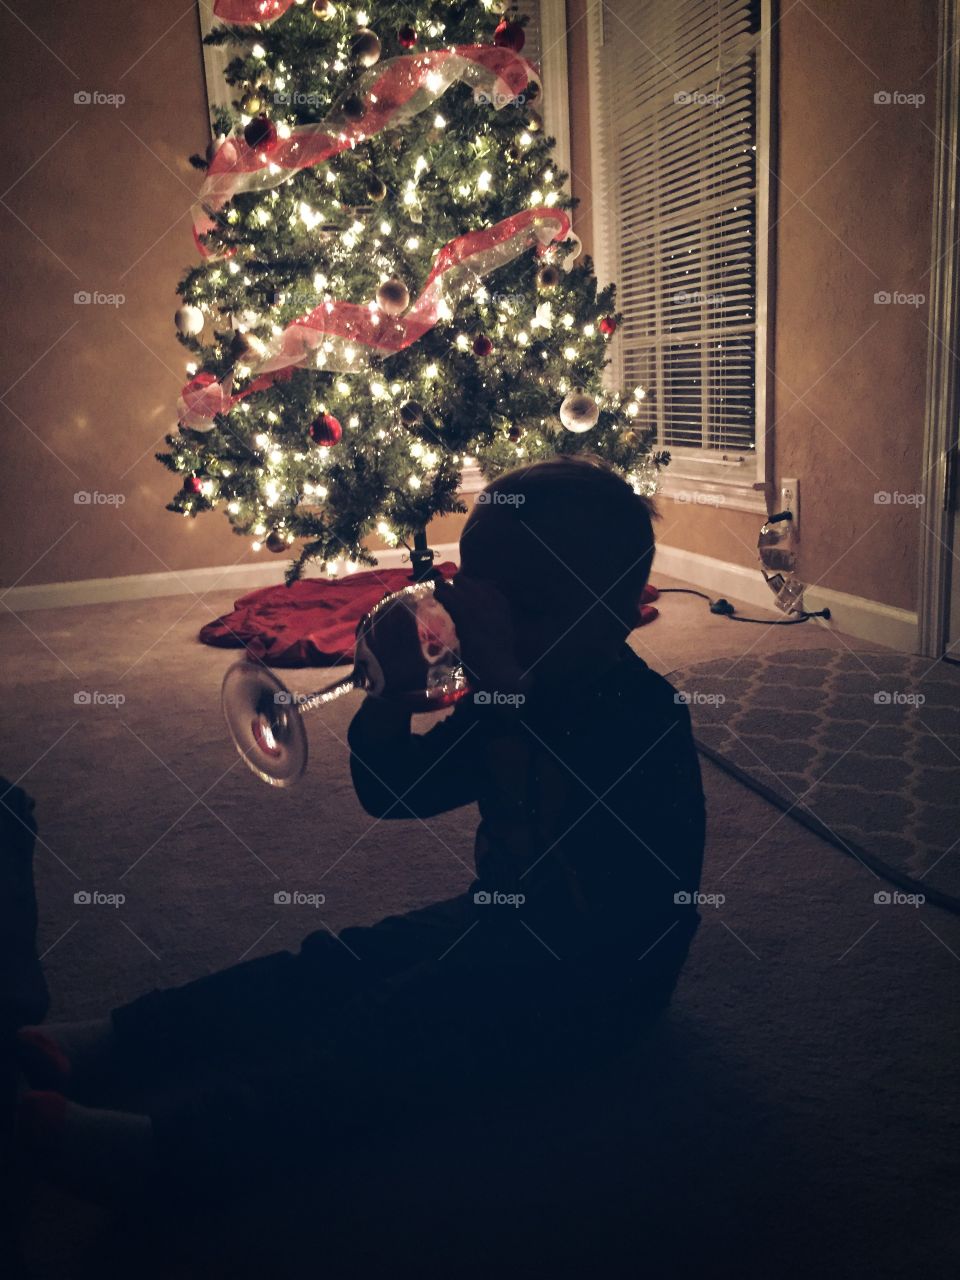 Silhouette of child drinking wine infront of christmas tree